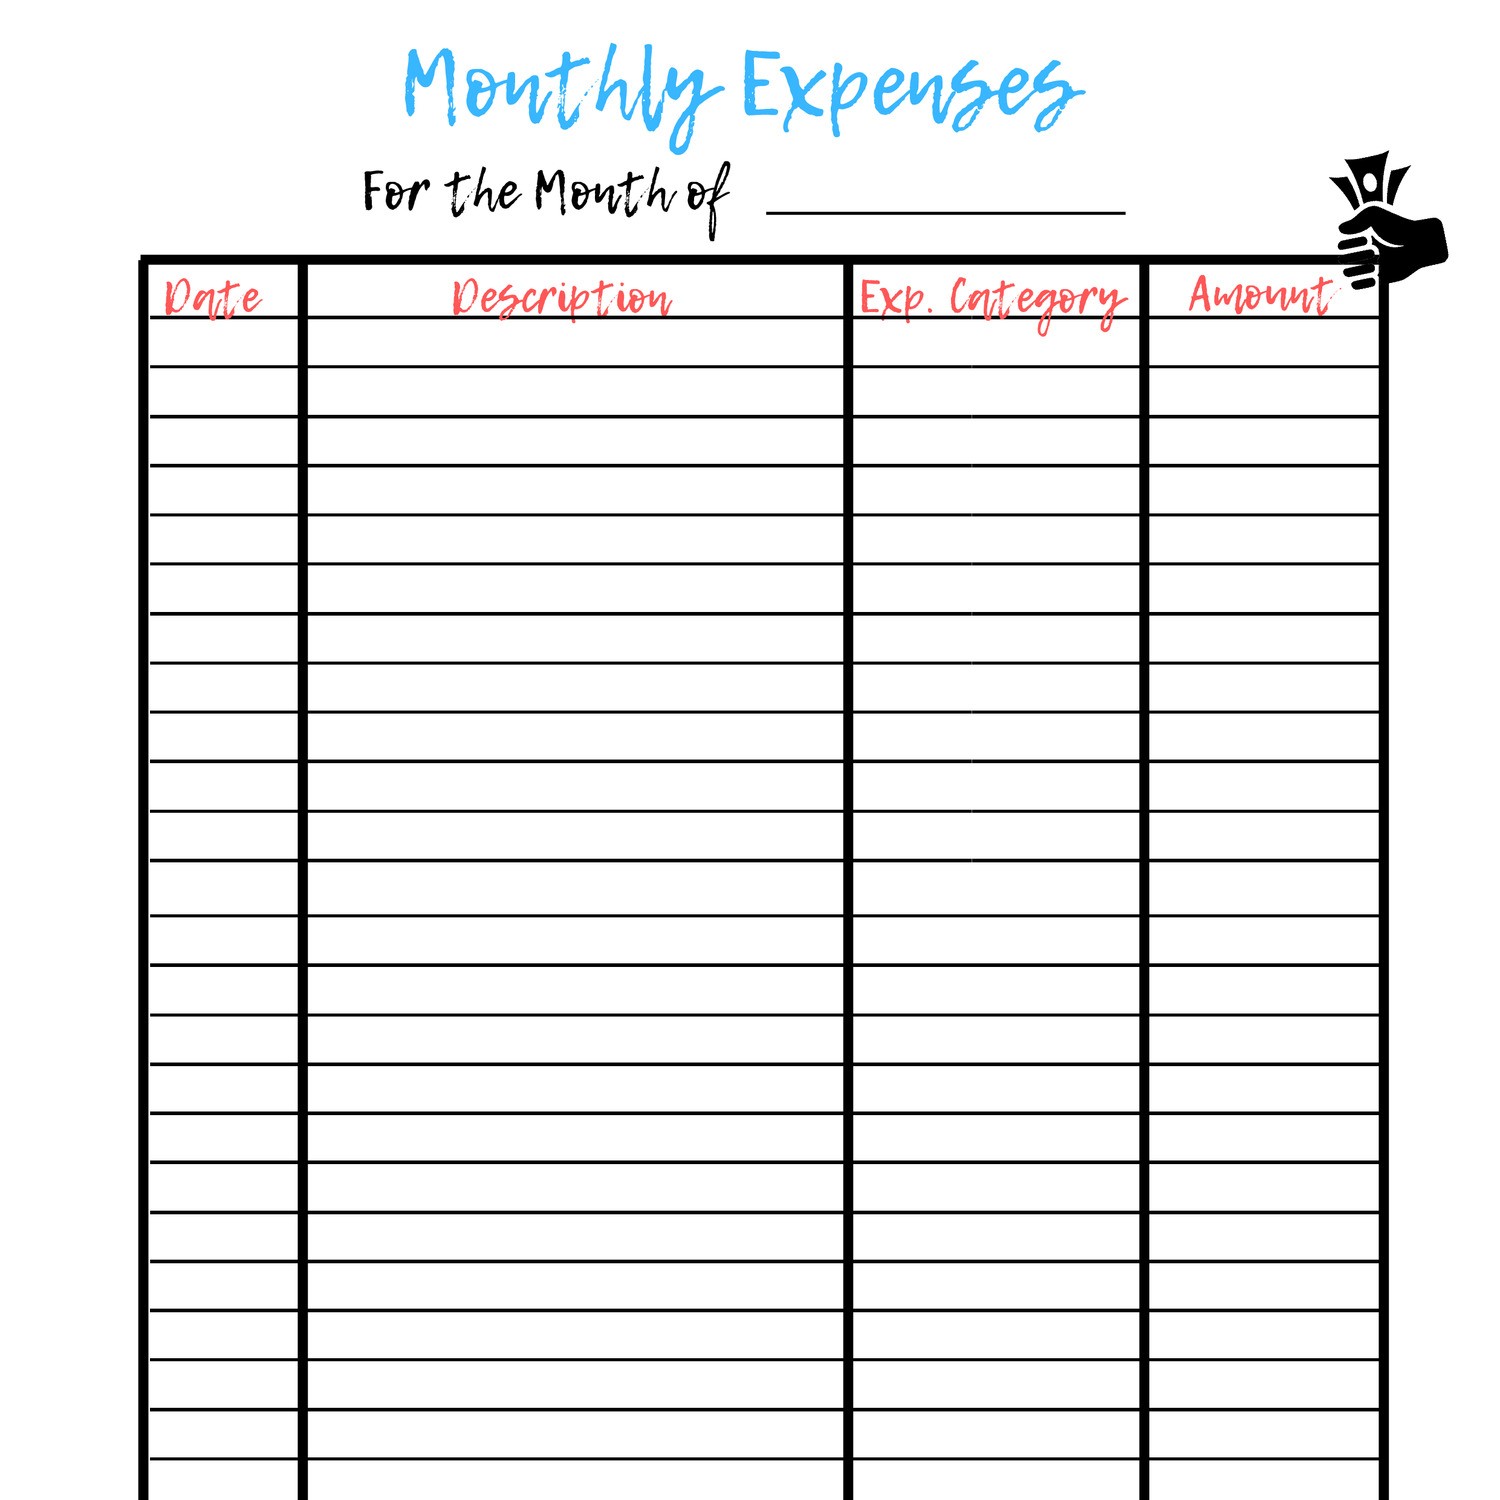 Monthly Expense Log.pdf DocDroid